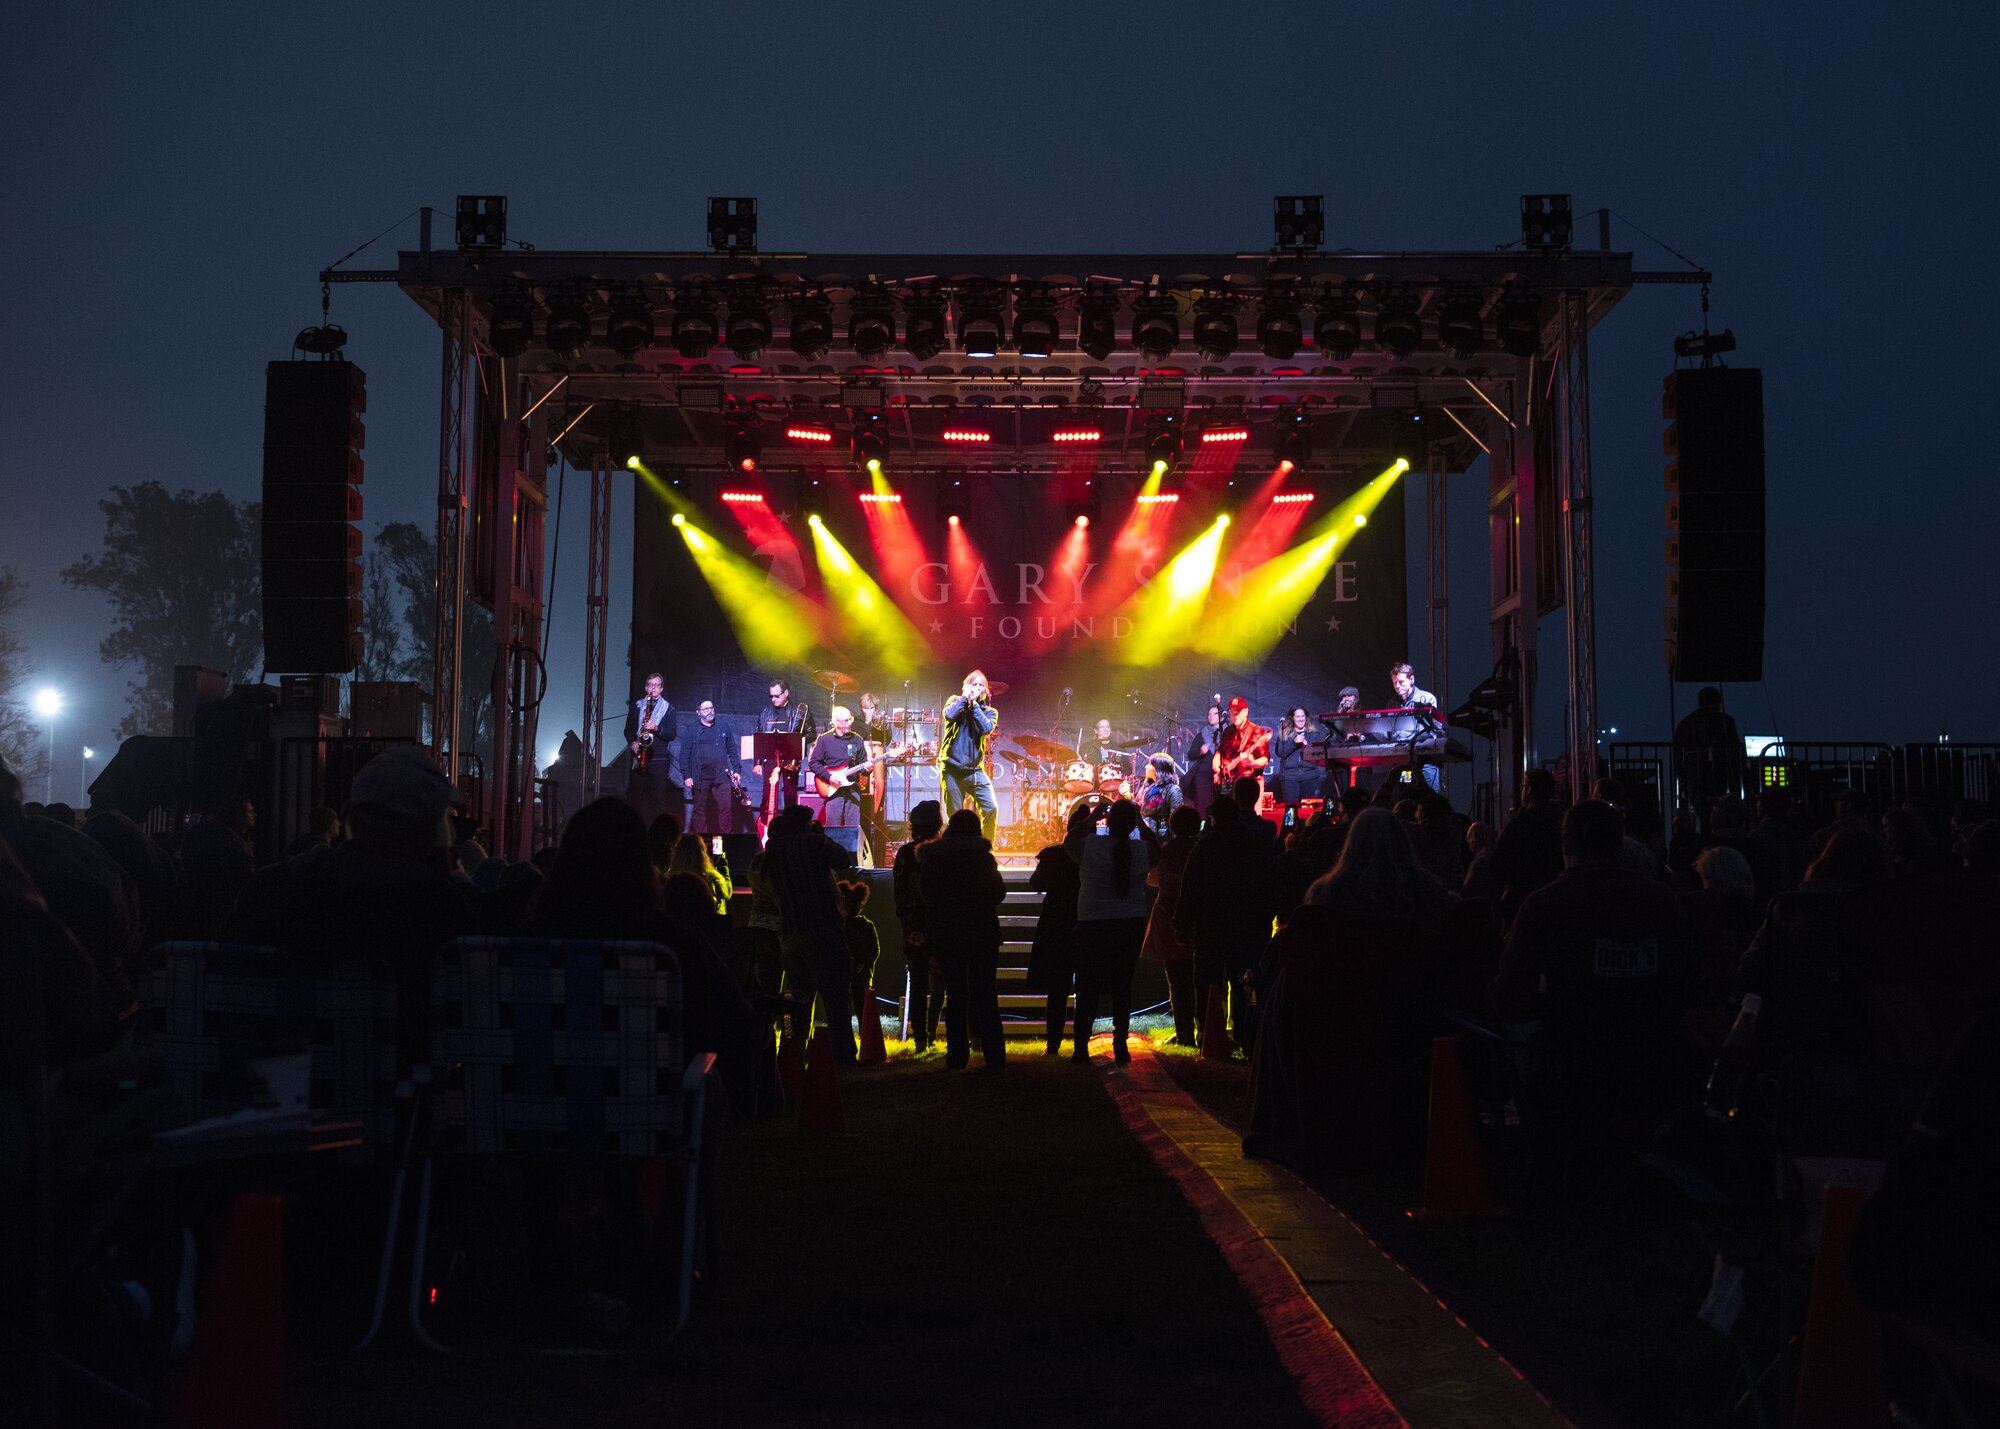 Members of Vandenberg Air Force Base attend a Gary Sinise and the Lt. Dan Band concert as part of a military appreciation event, Nov. 8, 2019 at Vandenberg AFB, Calif. The band performed at Vandenberg AFB, where they emphasized their support to organizations that are working for veterans, wounded service members and their families. (U.S. Air Force photo by Airman 1st Class Aubree Milks)